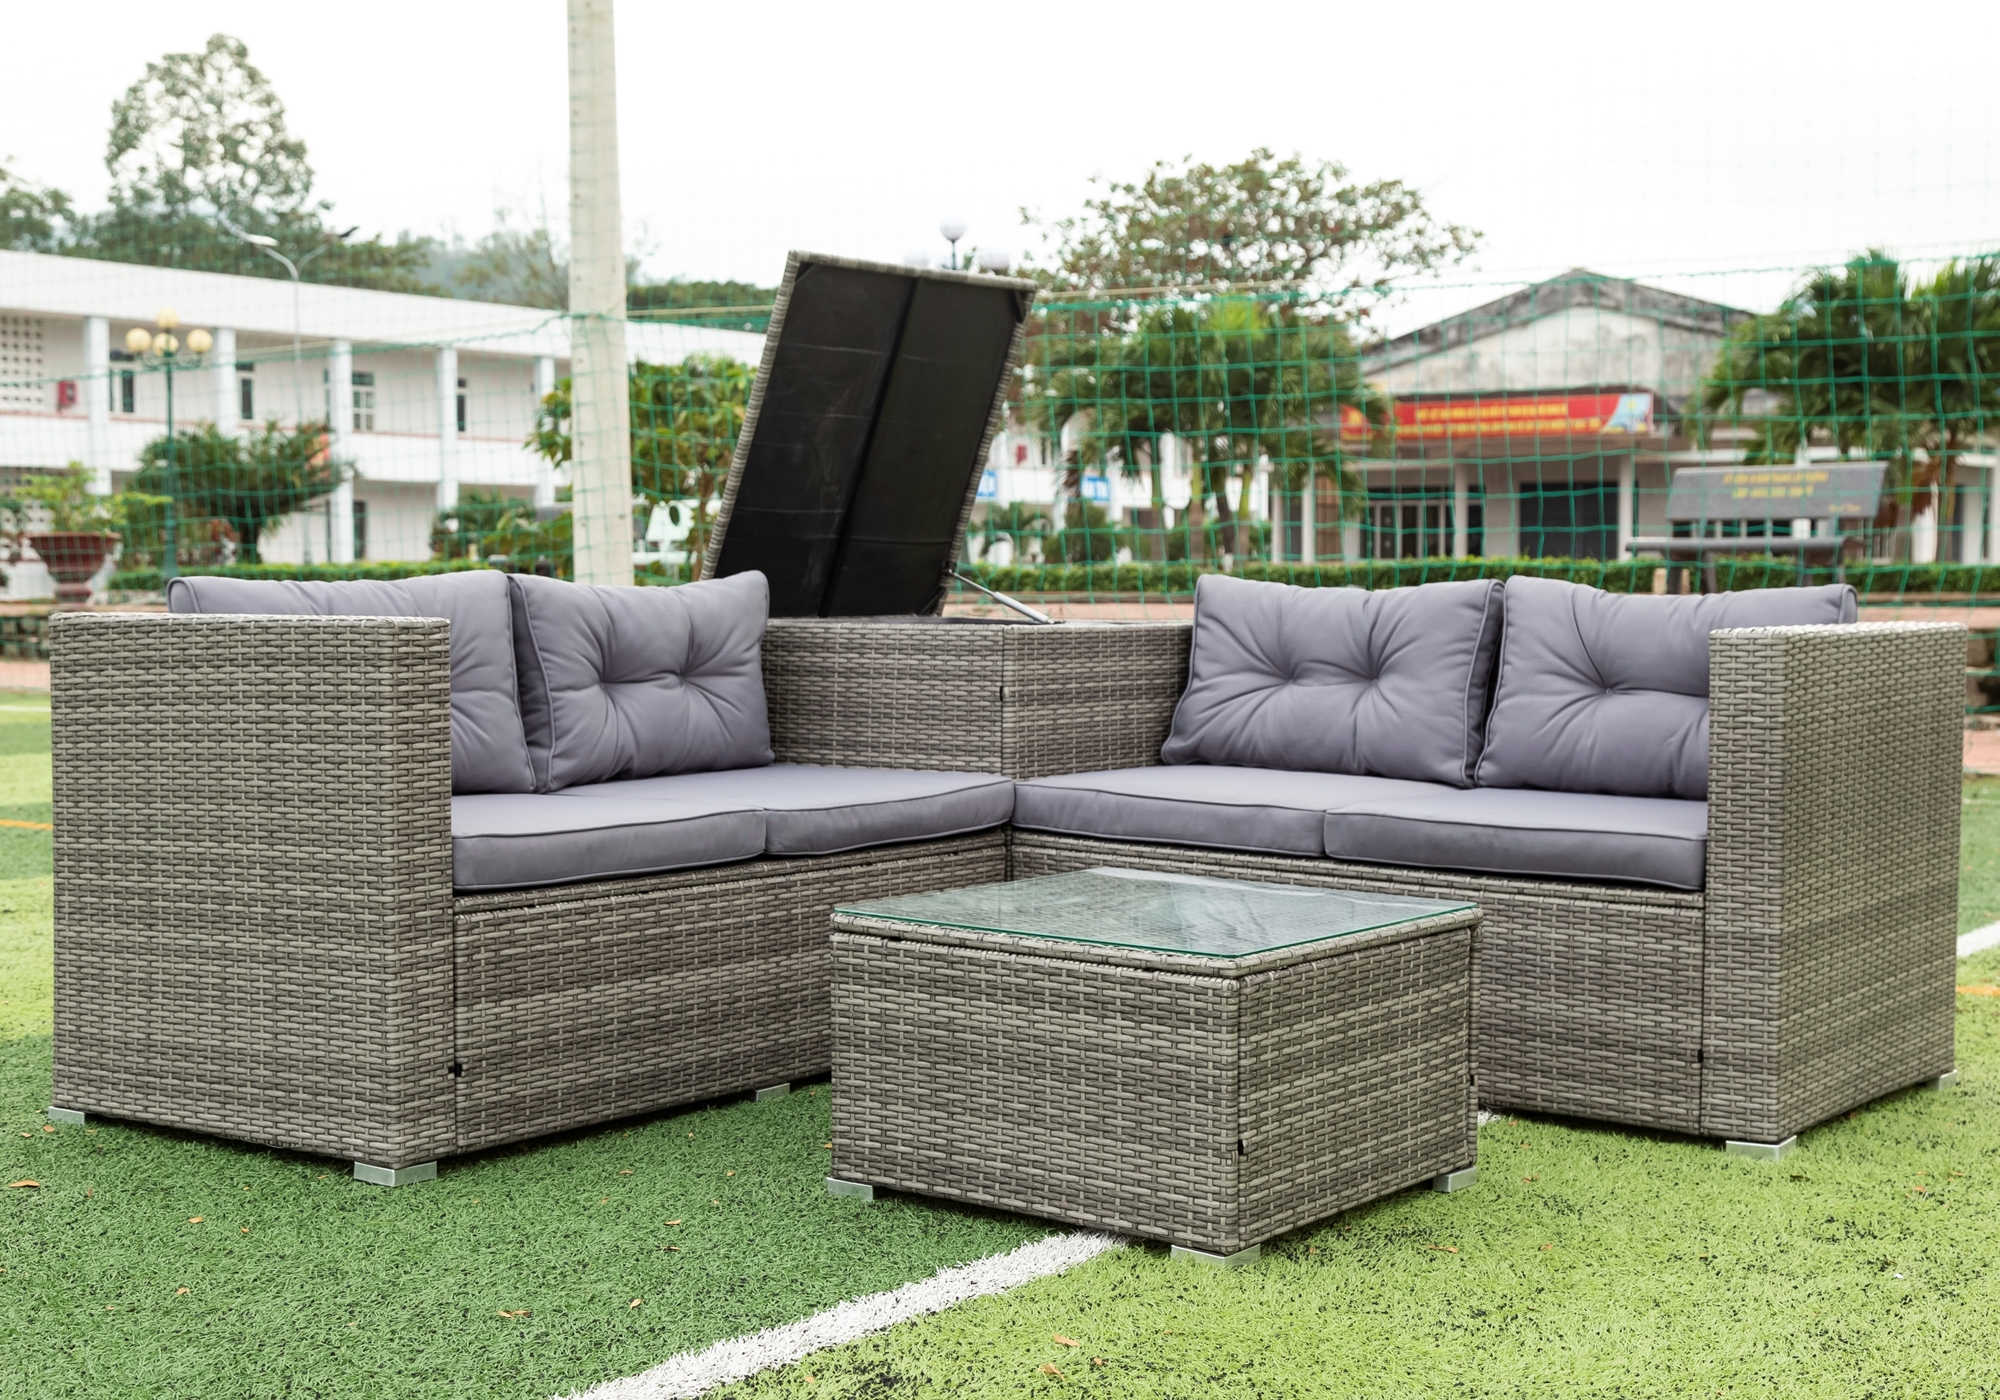 Patio Bistro Dining Chair Furniture Sets, 4 Pieces Patio Furniture Sets with Glass Coffee Table & Storage Box, Leisure Chair Conversation Set with Soft Cushion for Garden Poolside, Grey, SS2174 - image 3 of 9